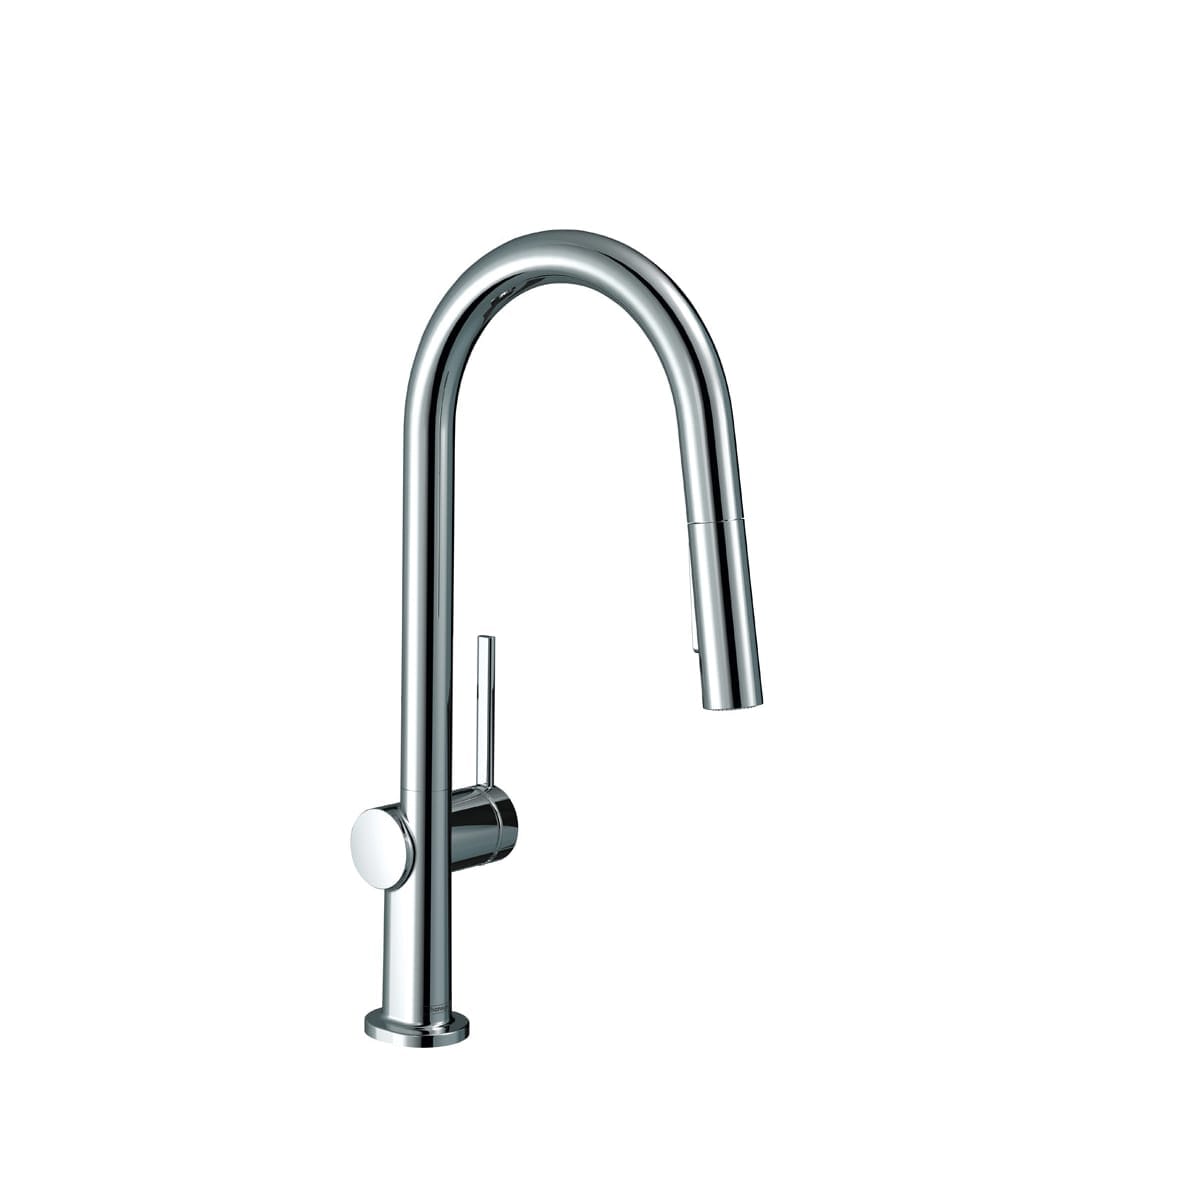 Hansgrohe Talis N HighArc Kitchen Faucet, A-Style 2-Spray Pull-Down with sBox, 1.75 GPM -  72850001